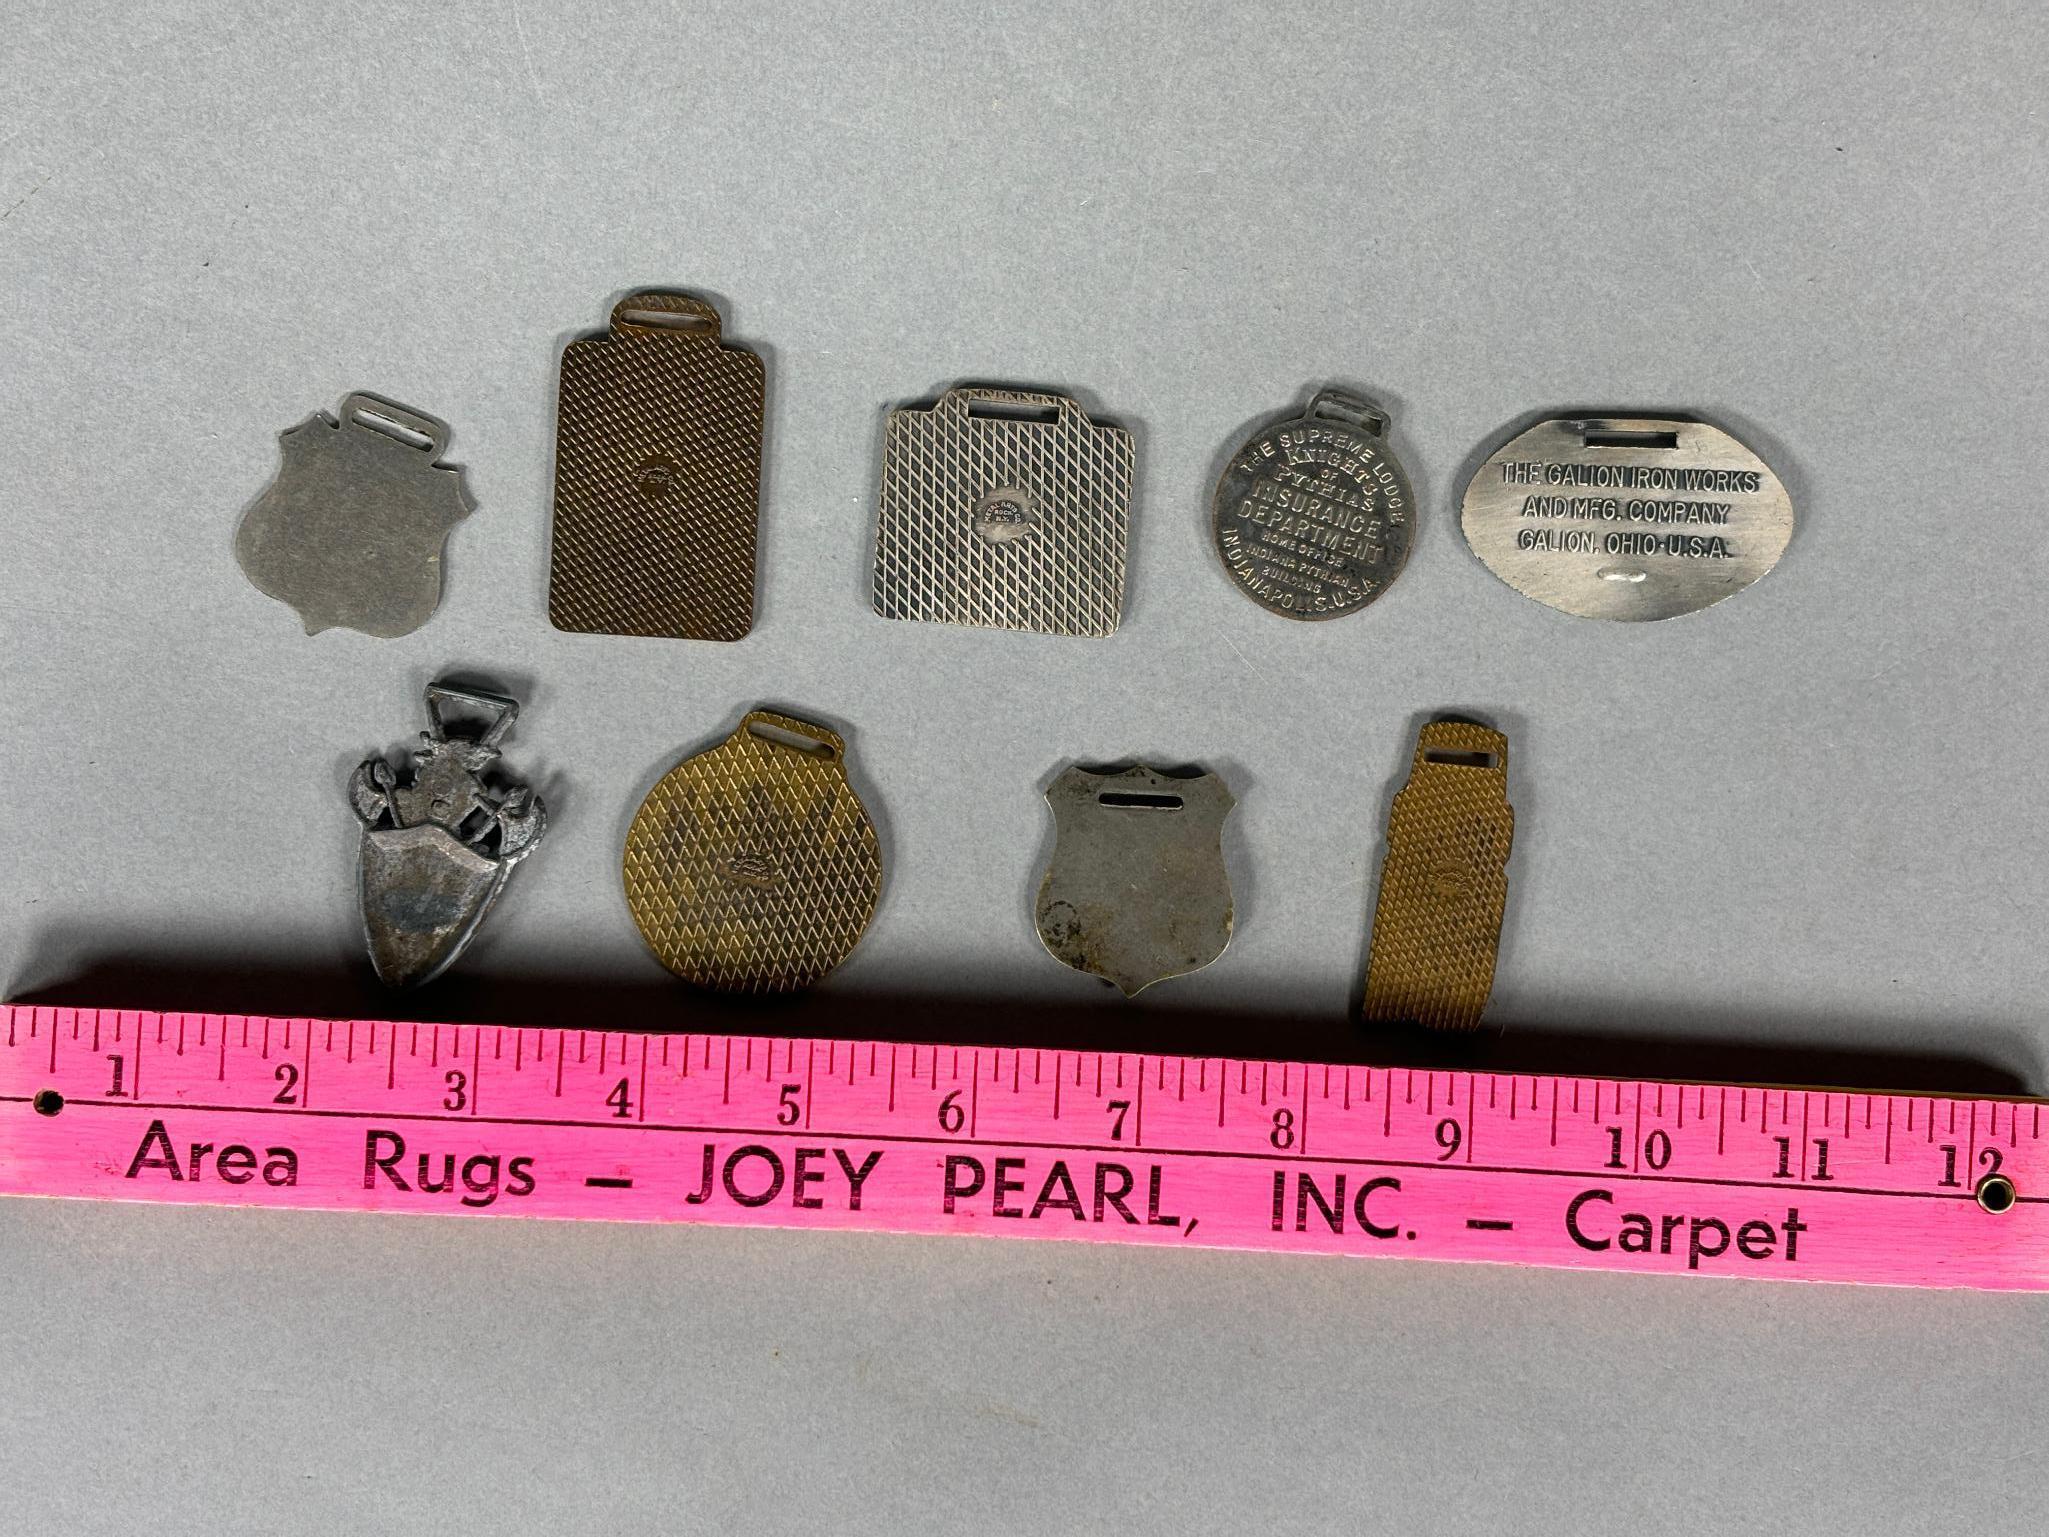 Group Lot of Antique Watch Fobs Advertising Fraternal